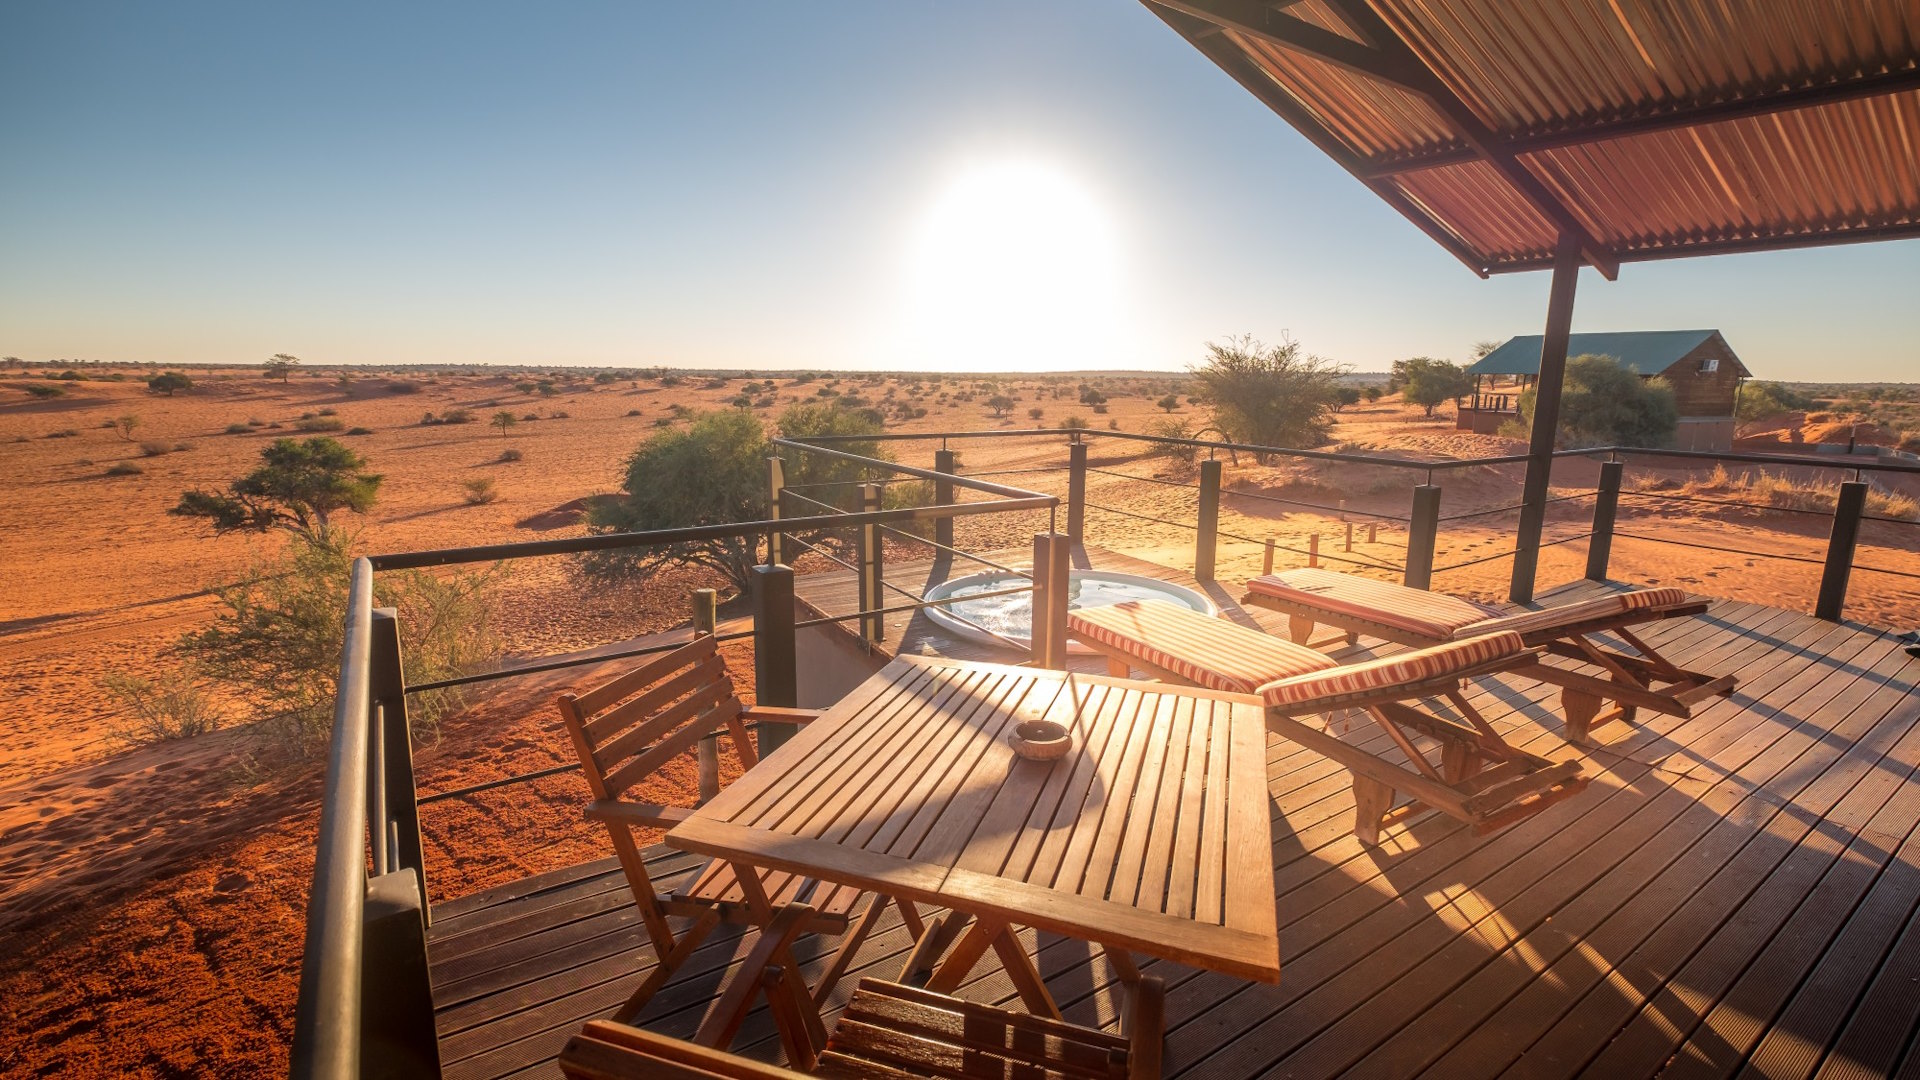 Bagatelle Lodge - Kalahari Game Ranch - Namibia - Guest room terrace with pool